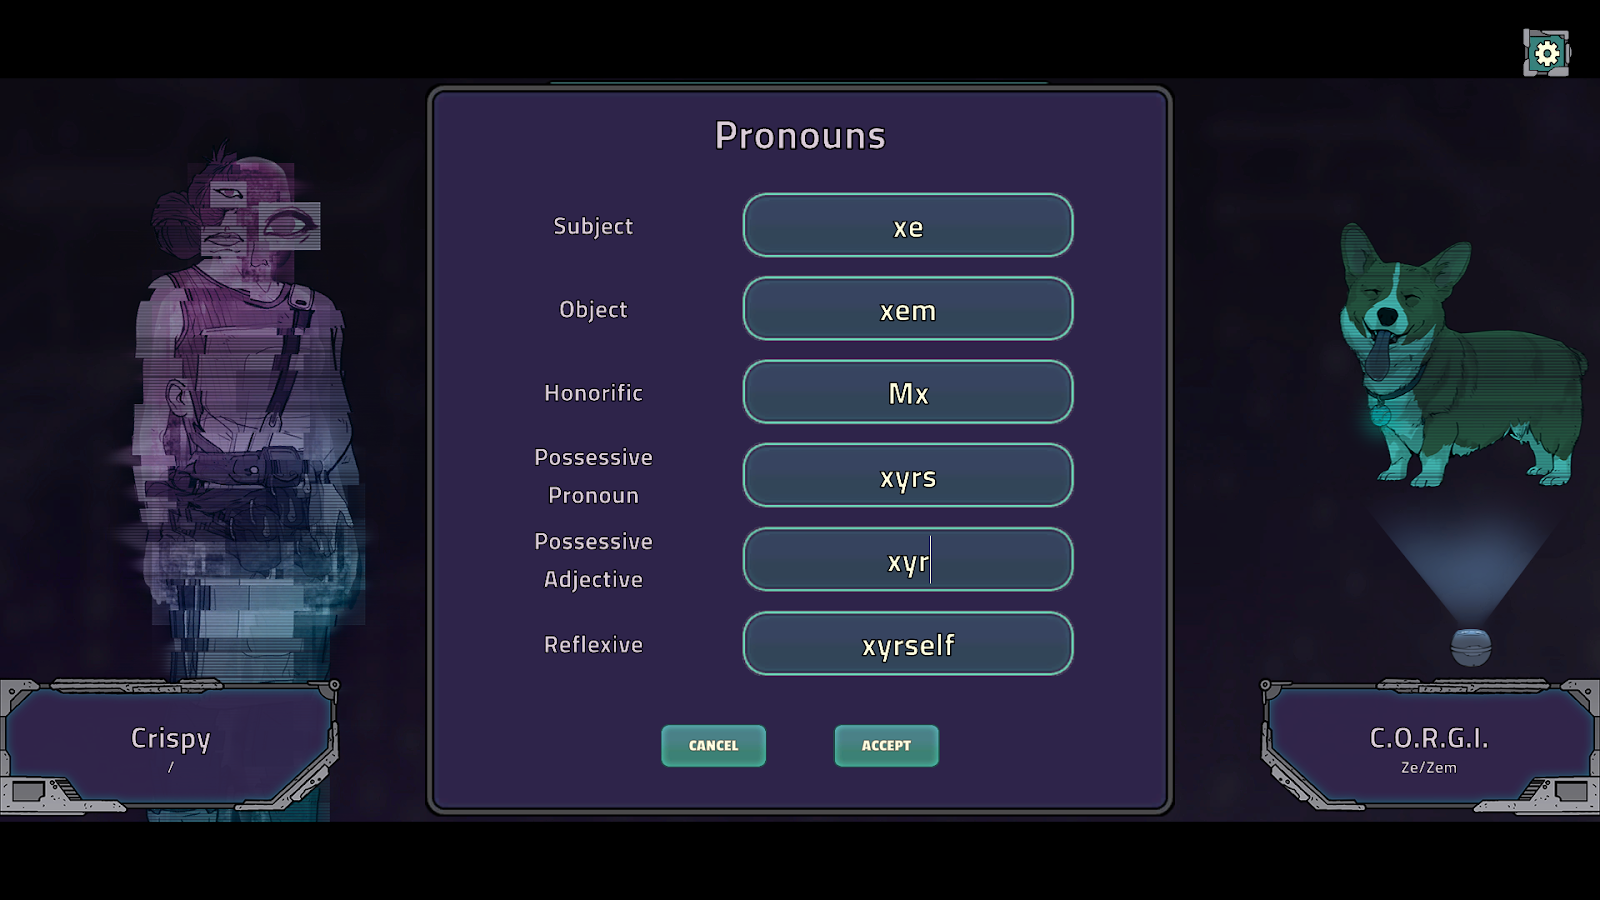 View of the pronouns window, which shows customization options for various characters in Crispy Creative's A Long Journey to an Uncertain End